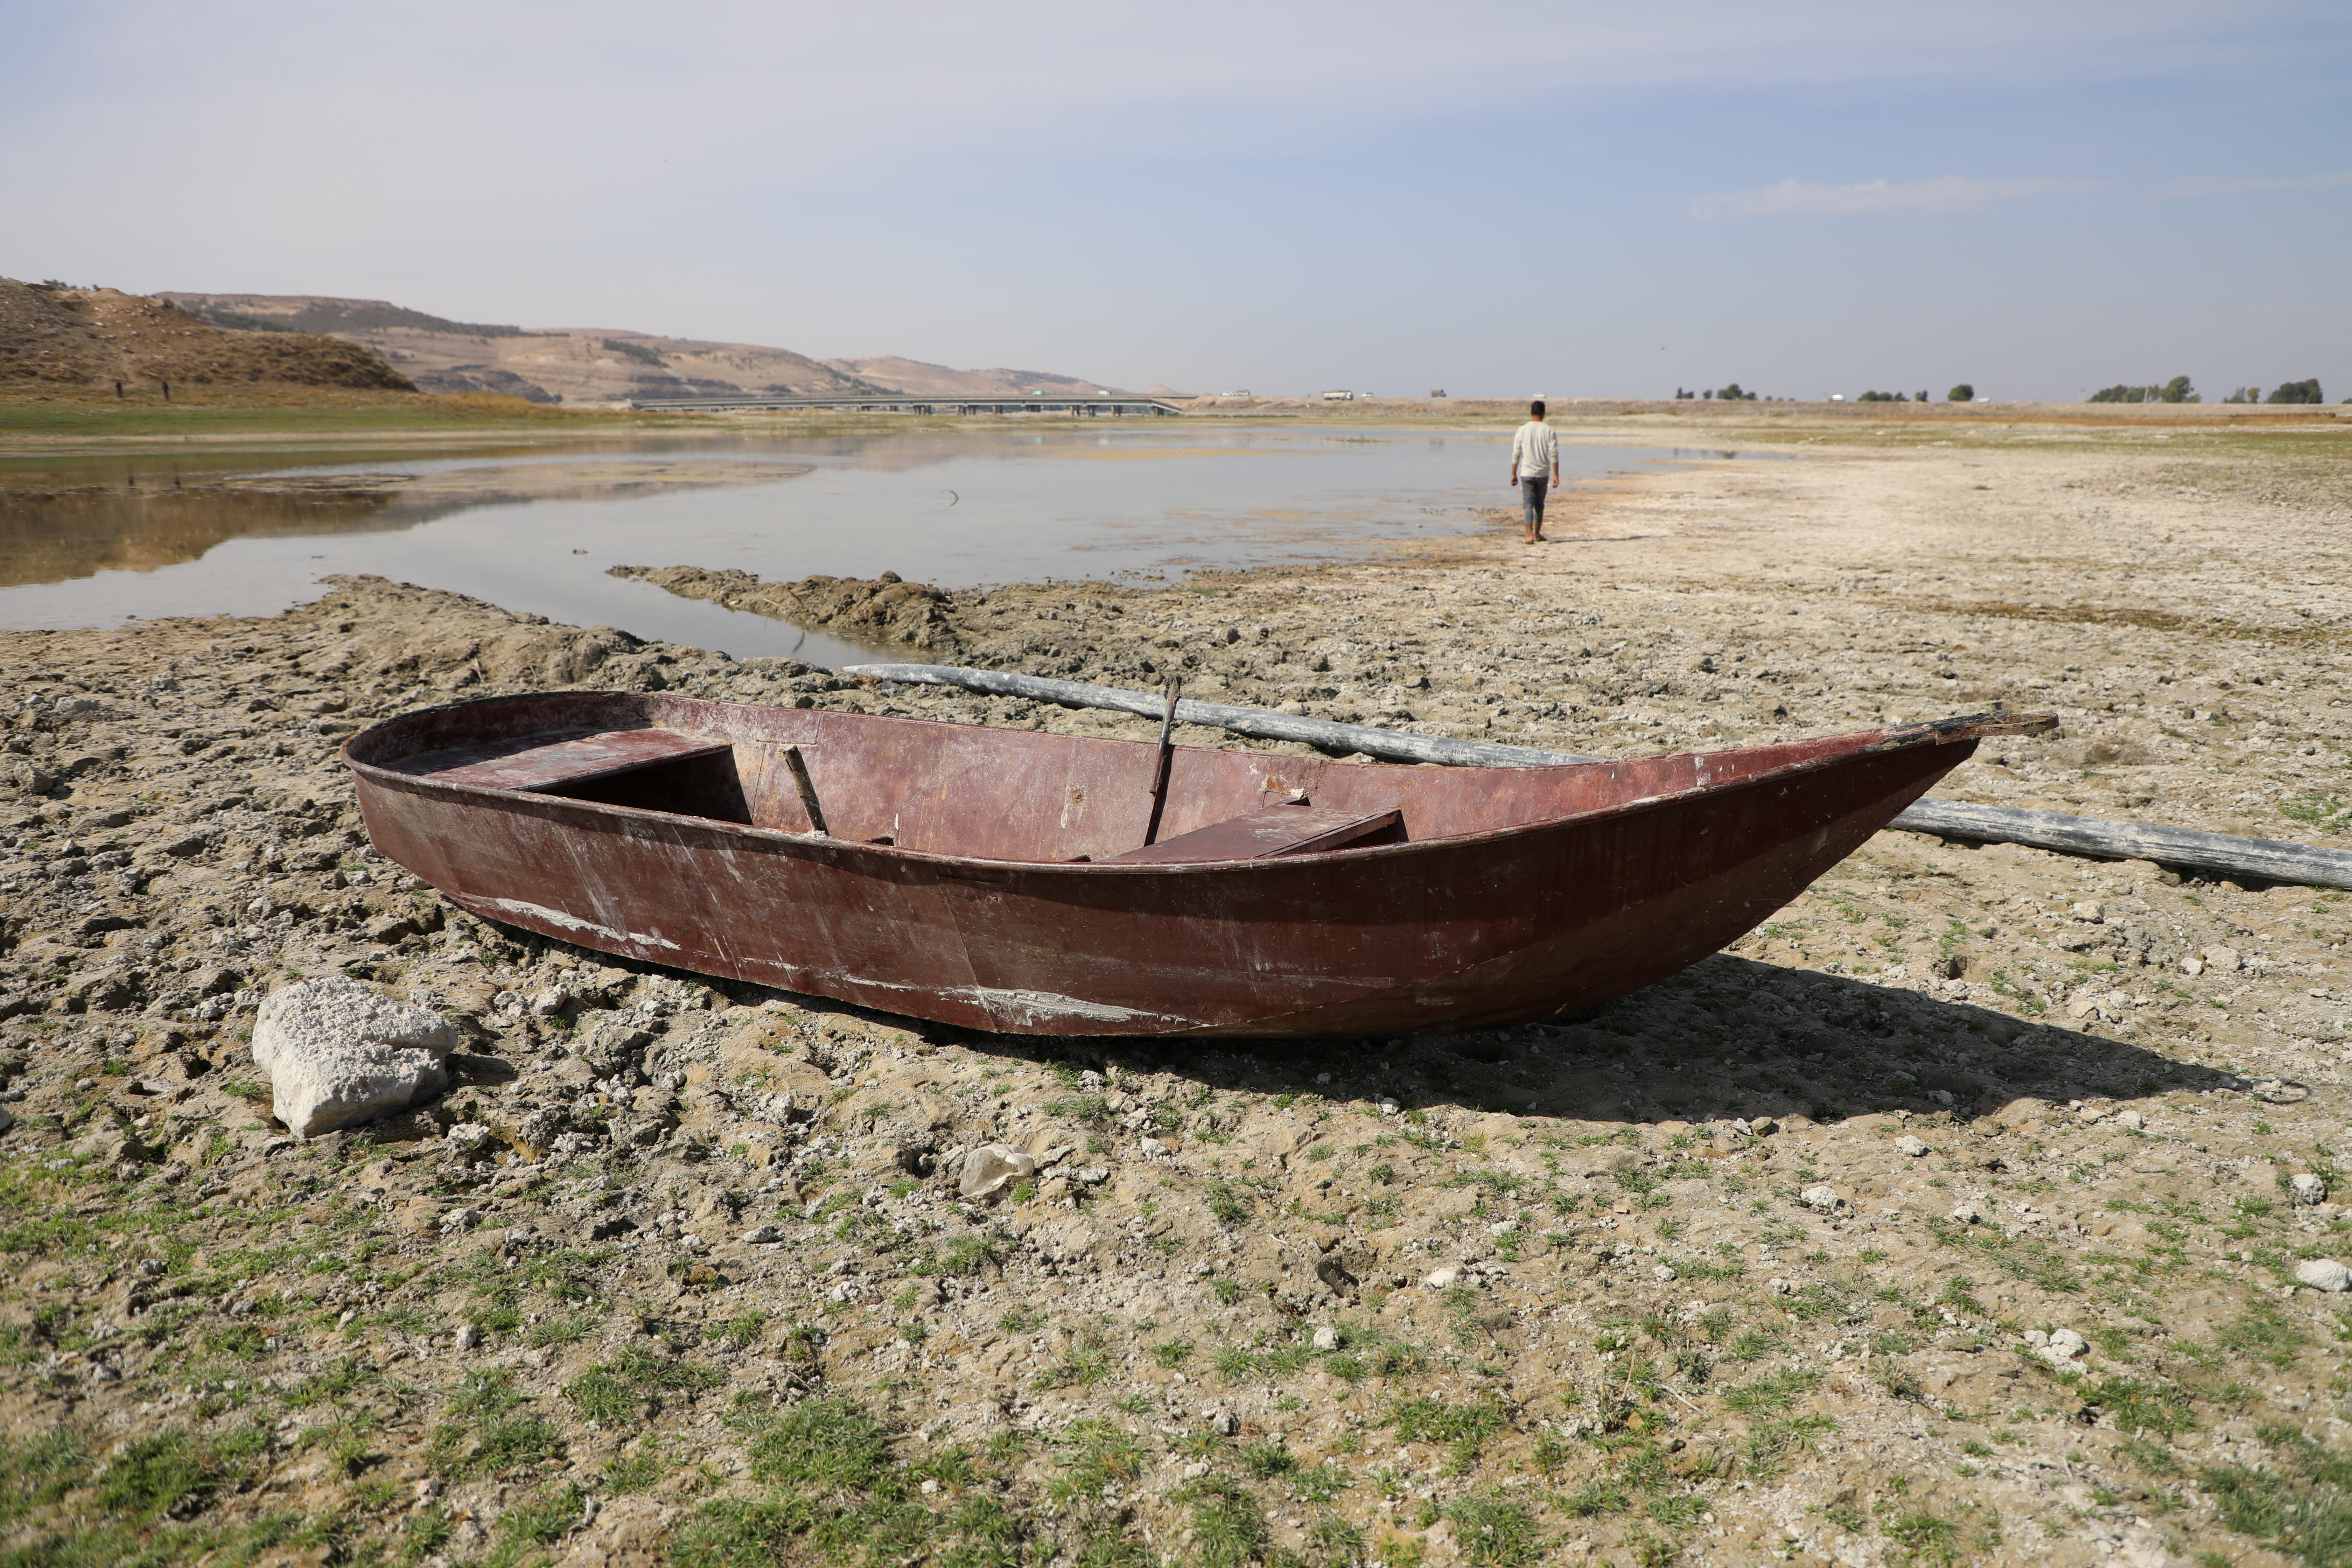 A boat lies on the dried out shore of the Euphrates river in Syria.